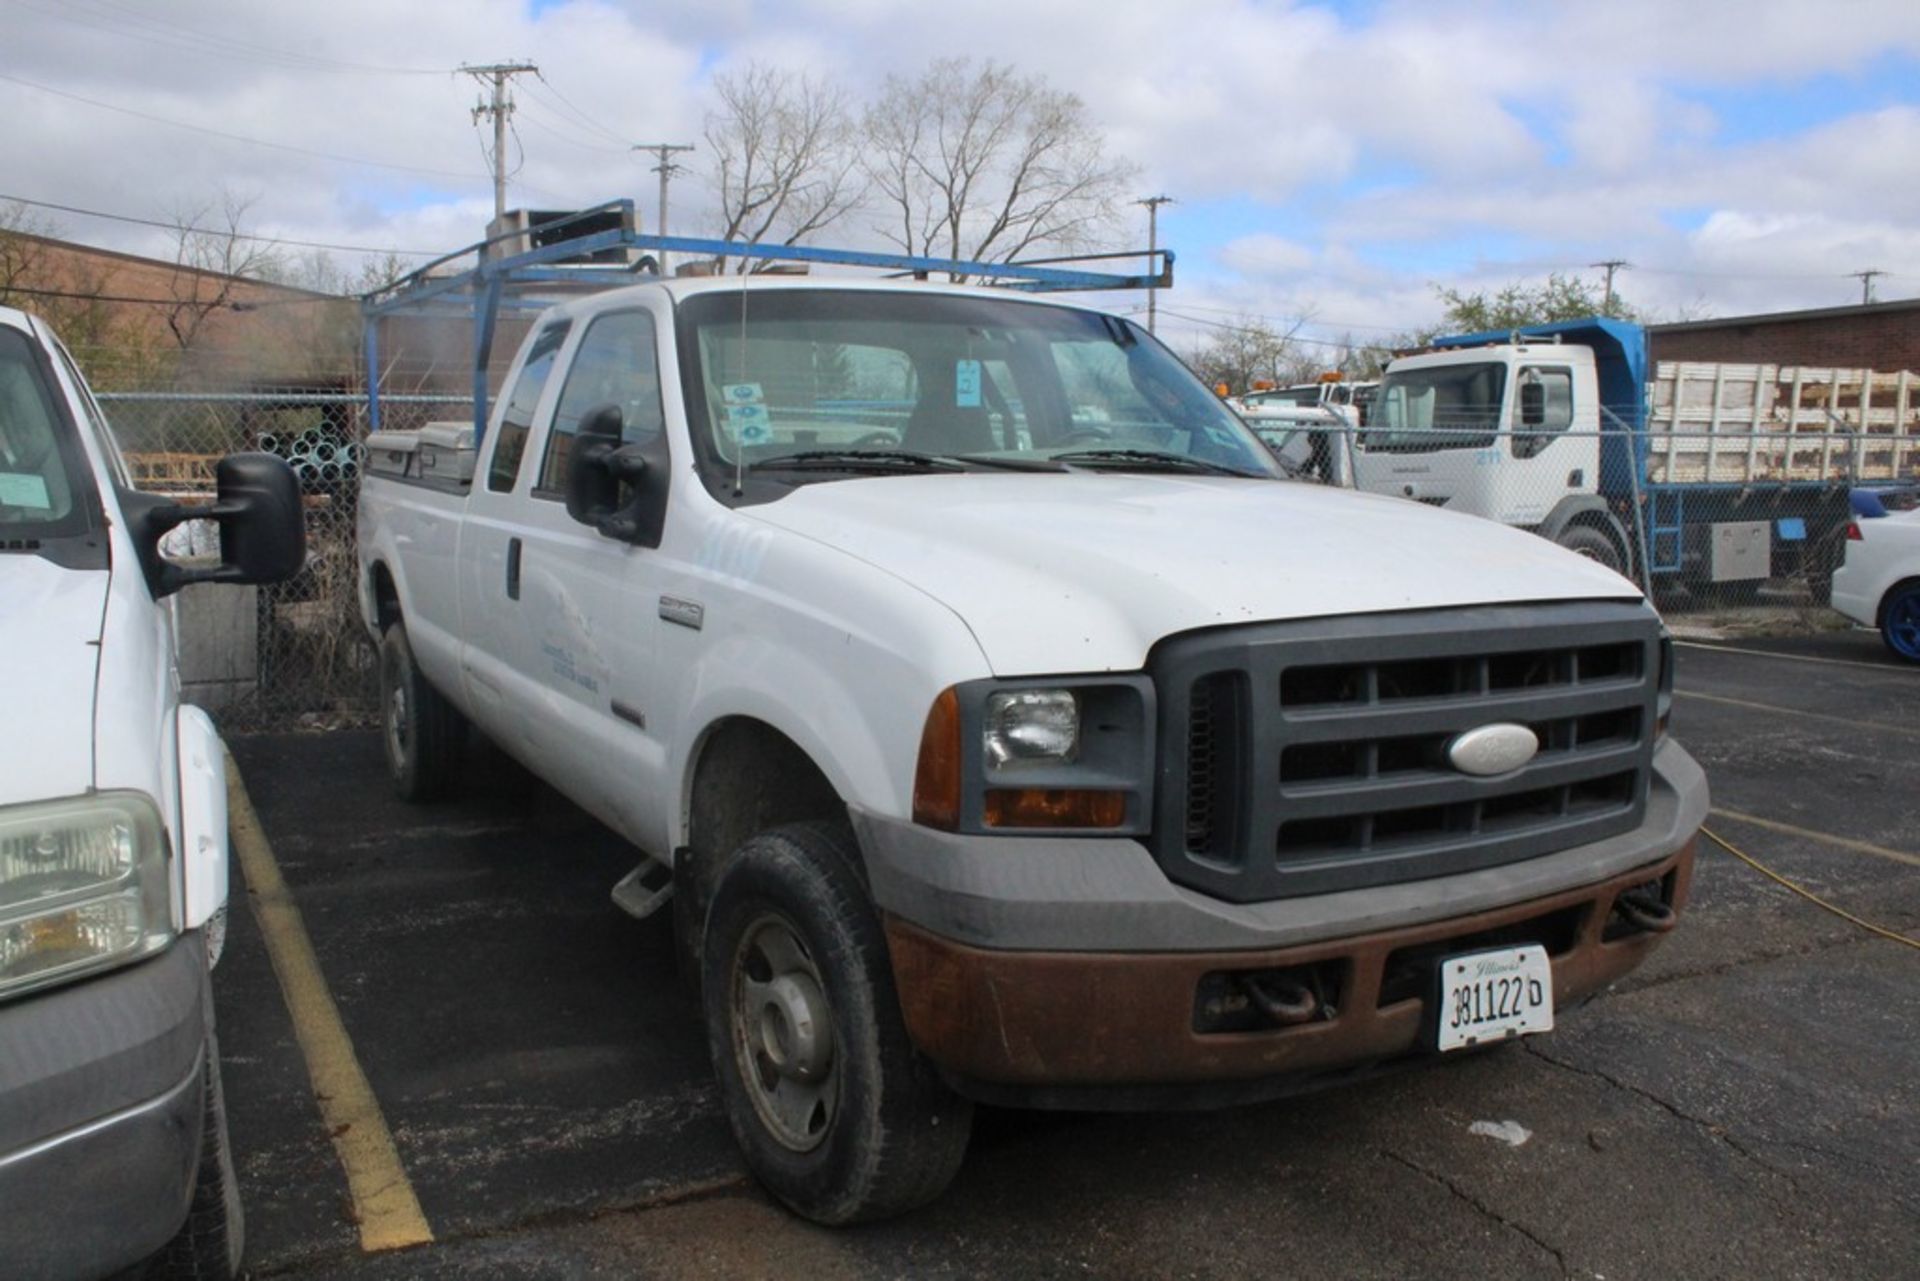 2005 FORD F-250 XL SUPER DUTY EXTENDED CAB 4 X 4 PICKUP TRUCK VIN: 1FTSX21P95EB27089 (2005) 6.0L - Image 2 of 7